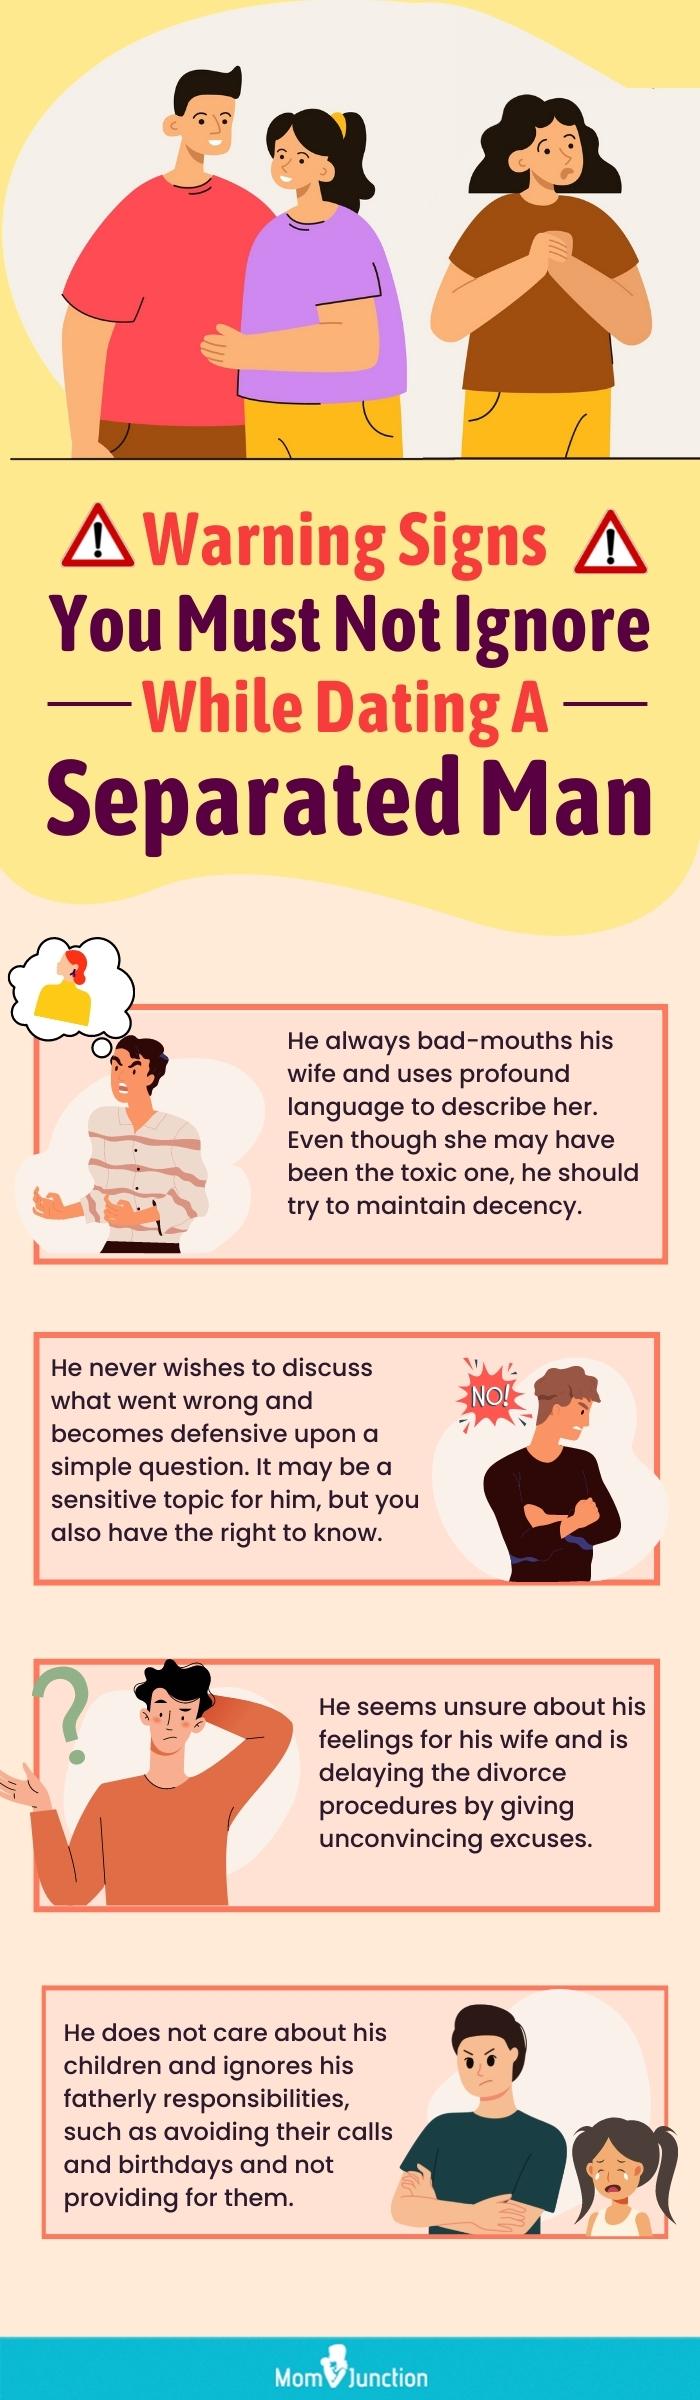 red flags in dating a separated man (infographic)